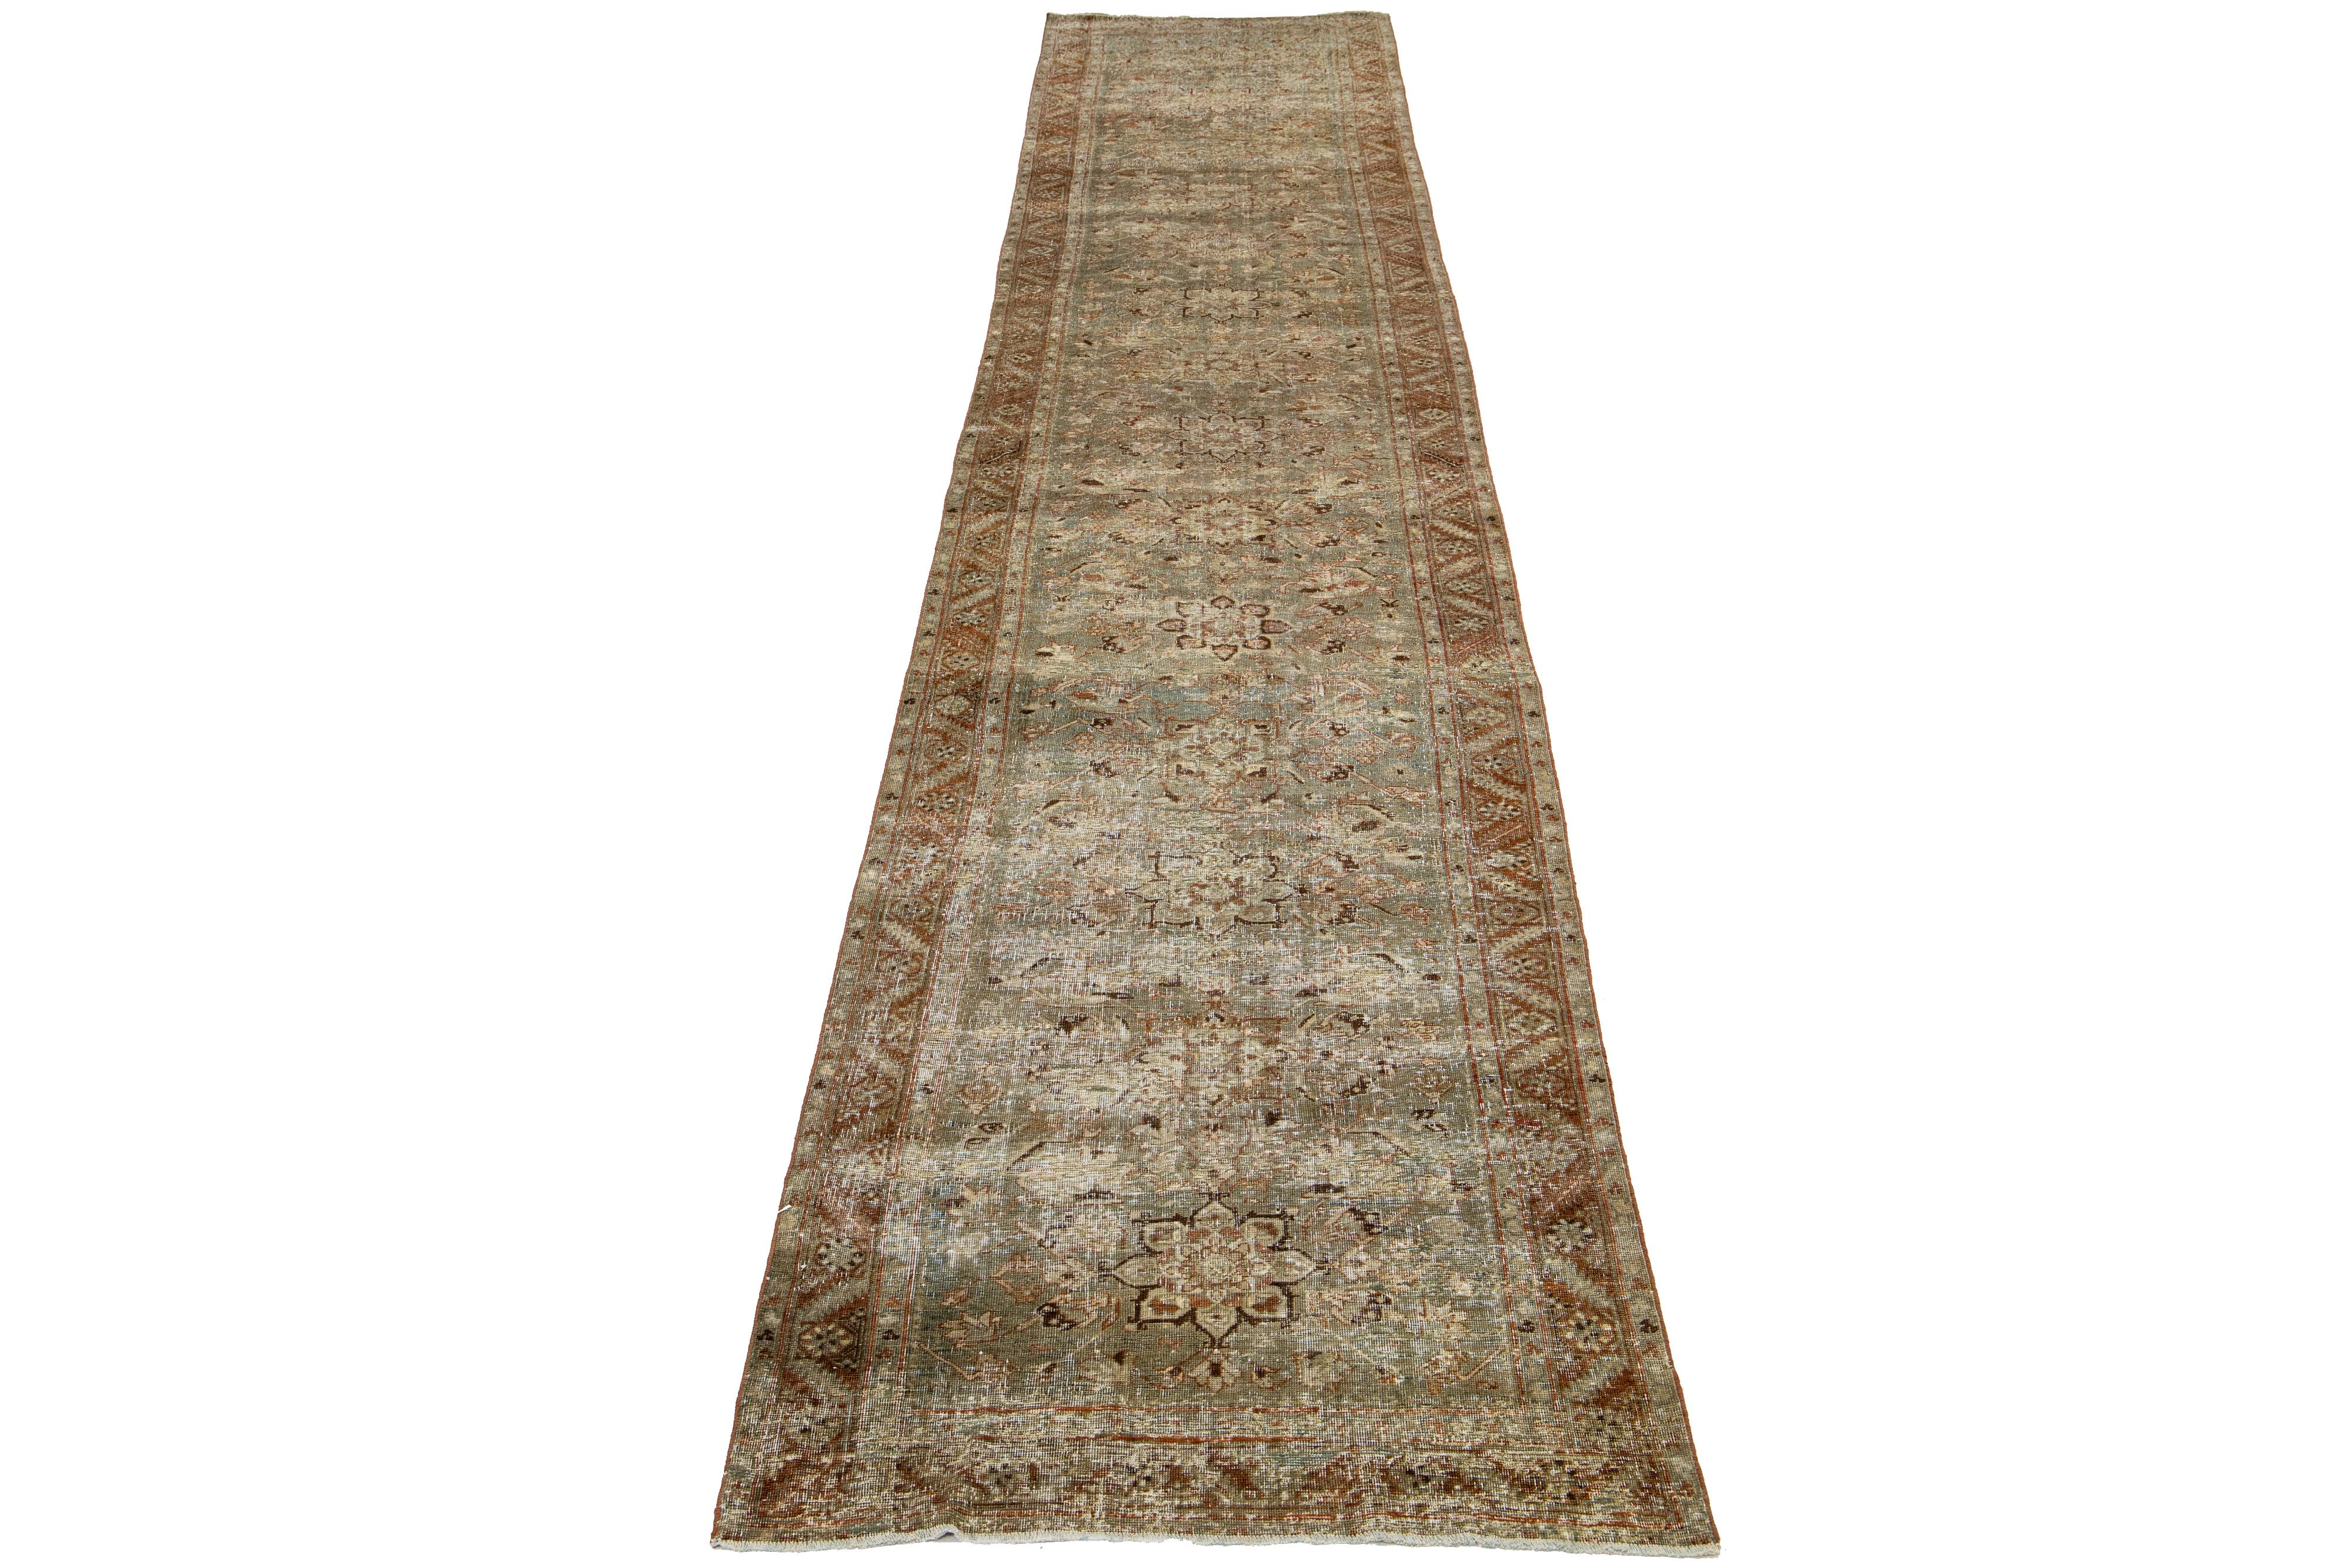 This Persian Malayer wool rug possesses an antique allure. It showcases hand-knotted wool in a blue color field. The floral pattern is embellished with rust, brown, and beige accents.

This rug measures 3' x 17'11